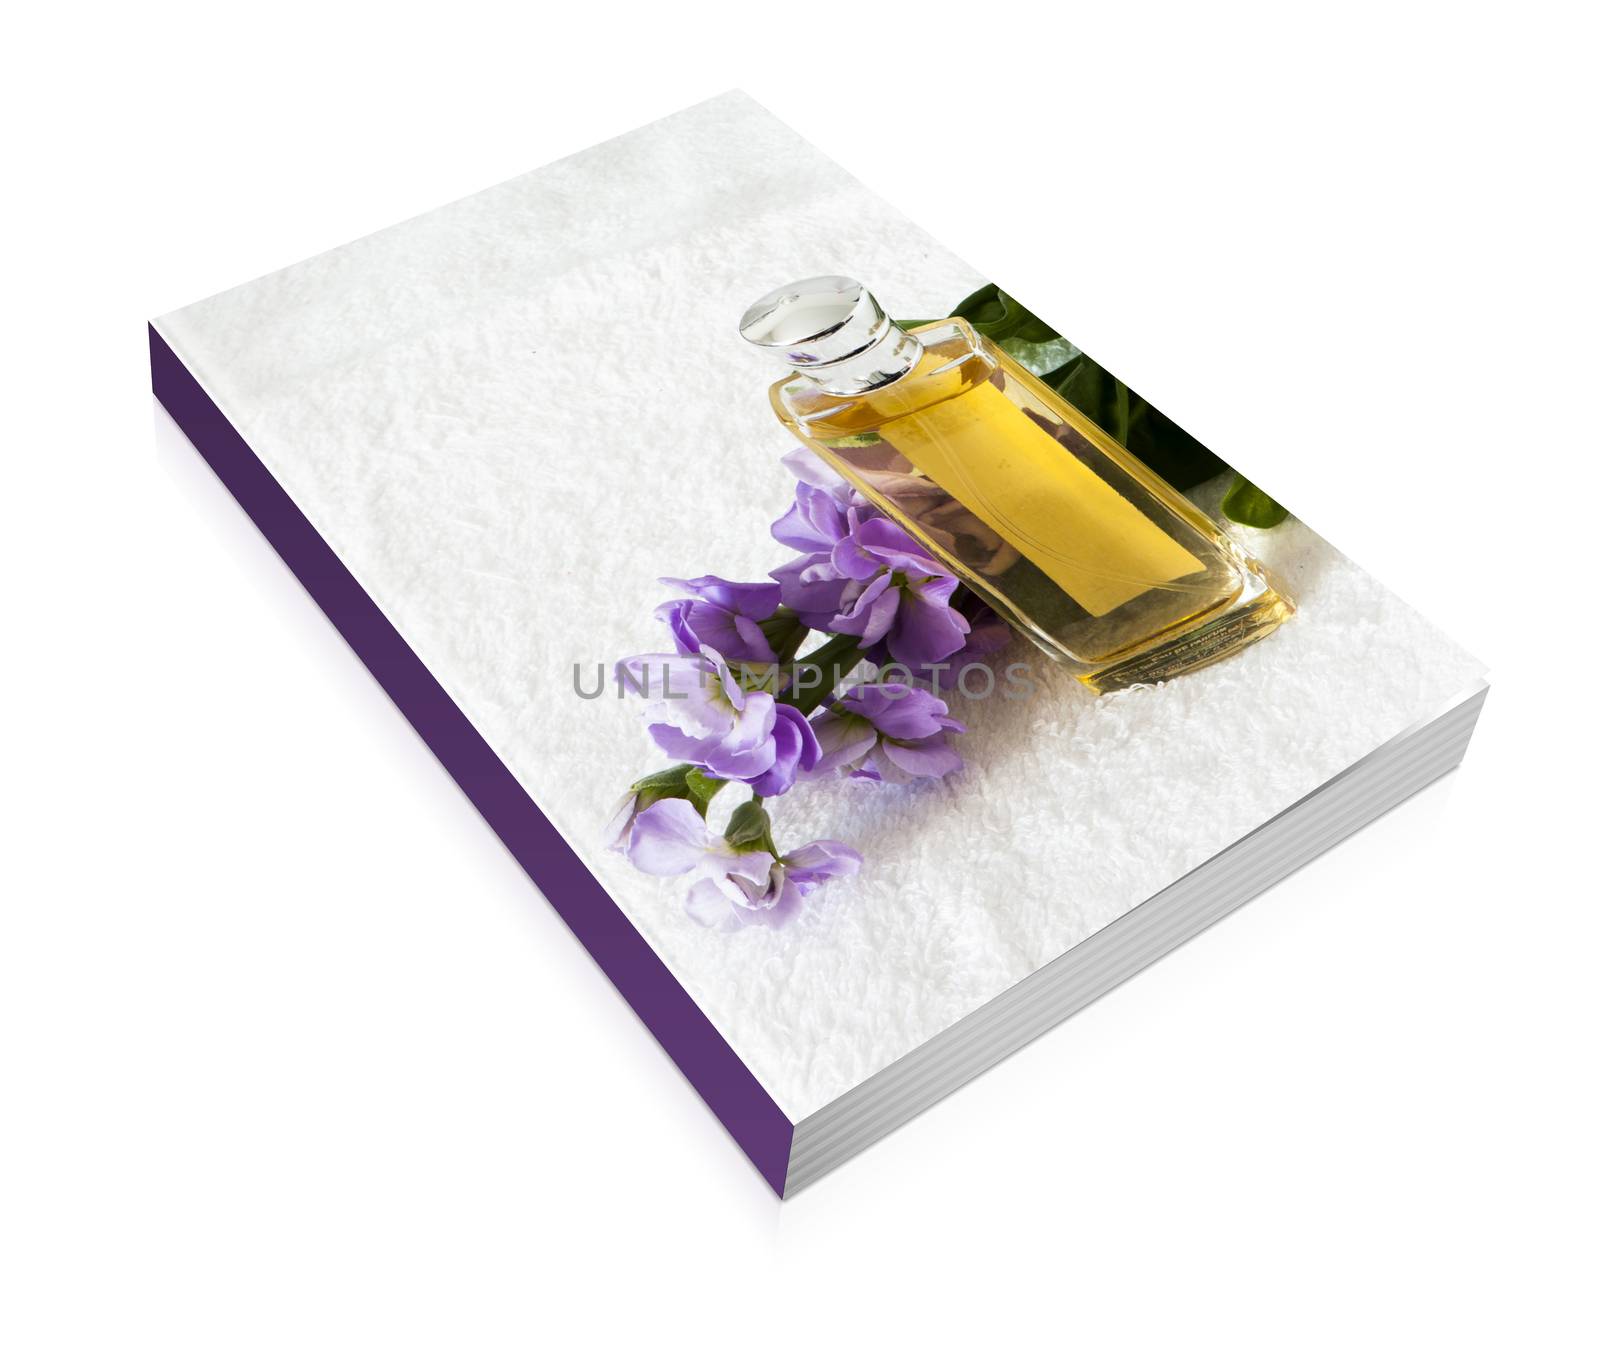 book of a perfume flask over a white towel